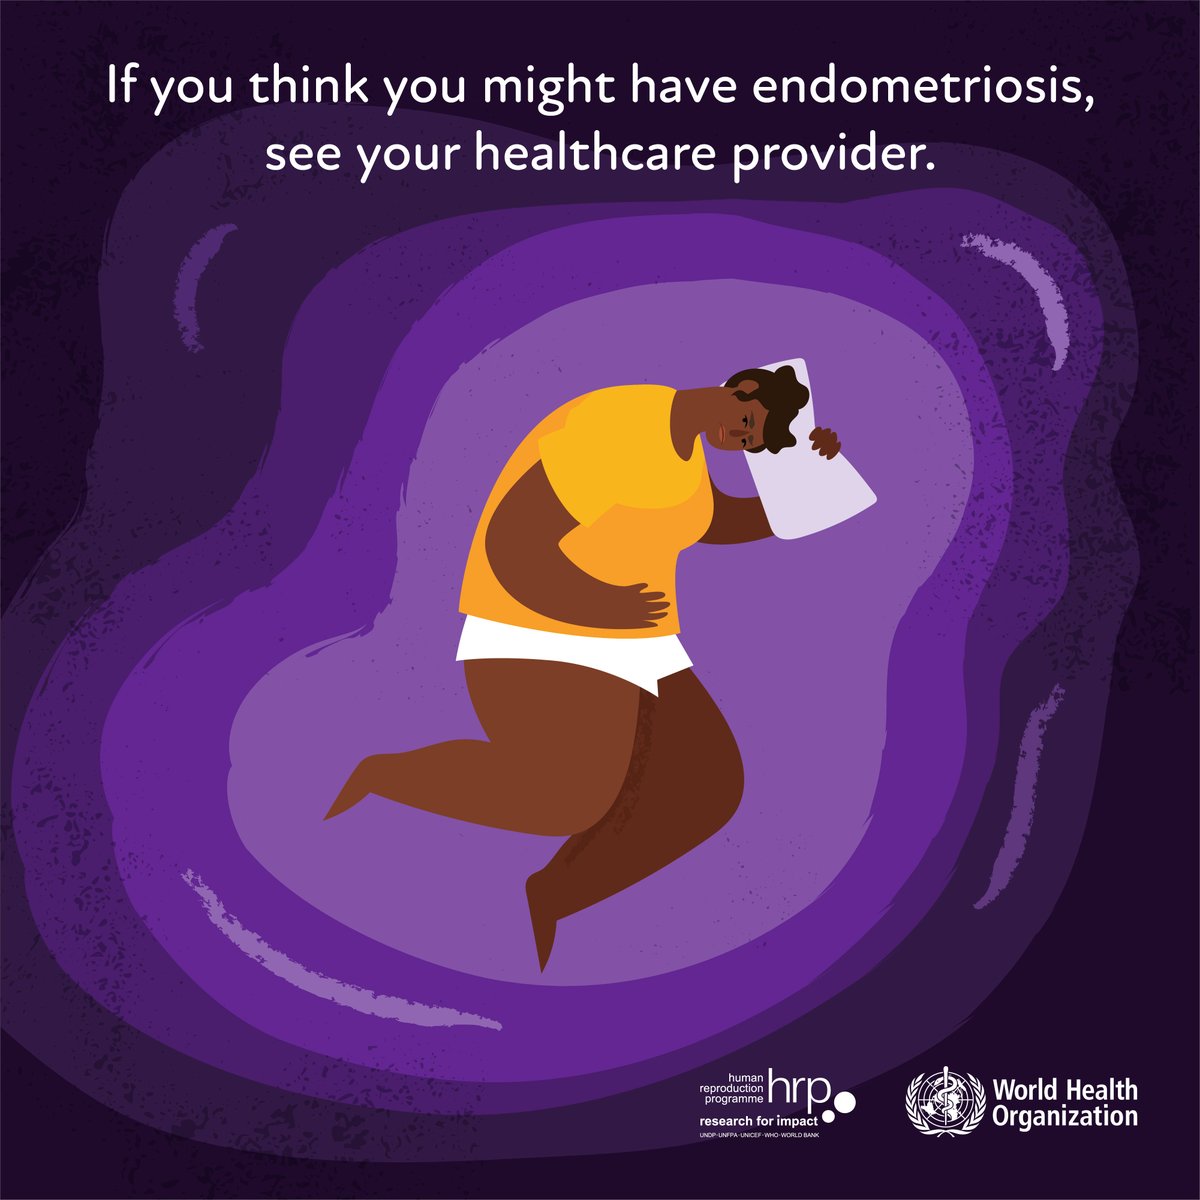 Endometriosis affects 1 in 10 women and girls of reproductive age. Symptoms may include: 🚺 painful periods 🚺 chronic pelvic pain 🚺 pain during and/or after sex 🚺 painful bowel movements 🚺 painful urination 🚺 fatigue 🚺 depression or anxiety 🚺 abdominal bloating & nausea